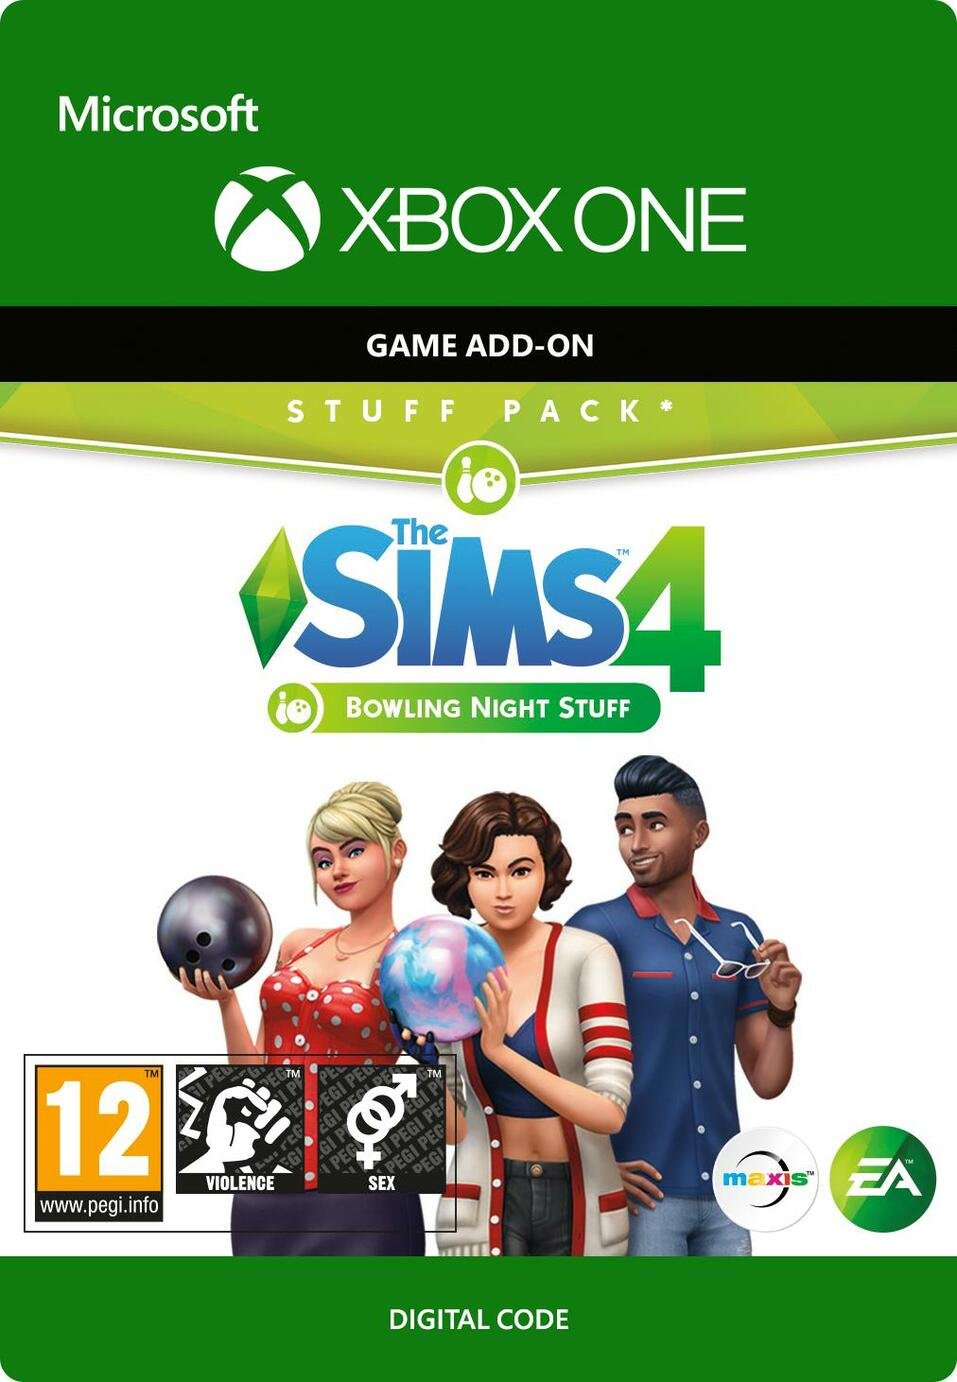 The Sims 4: Bowling Night Stuff Xbox Game - Digital Download